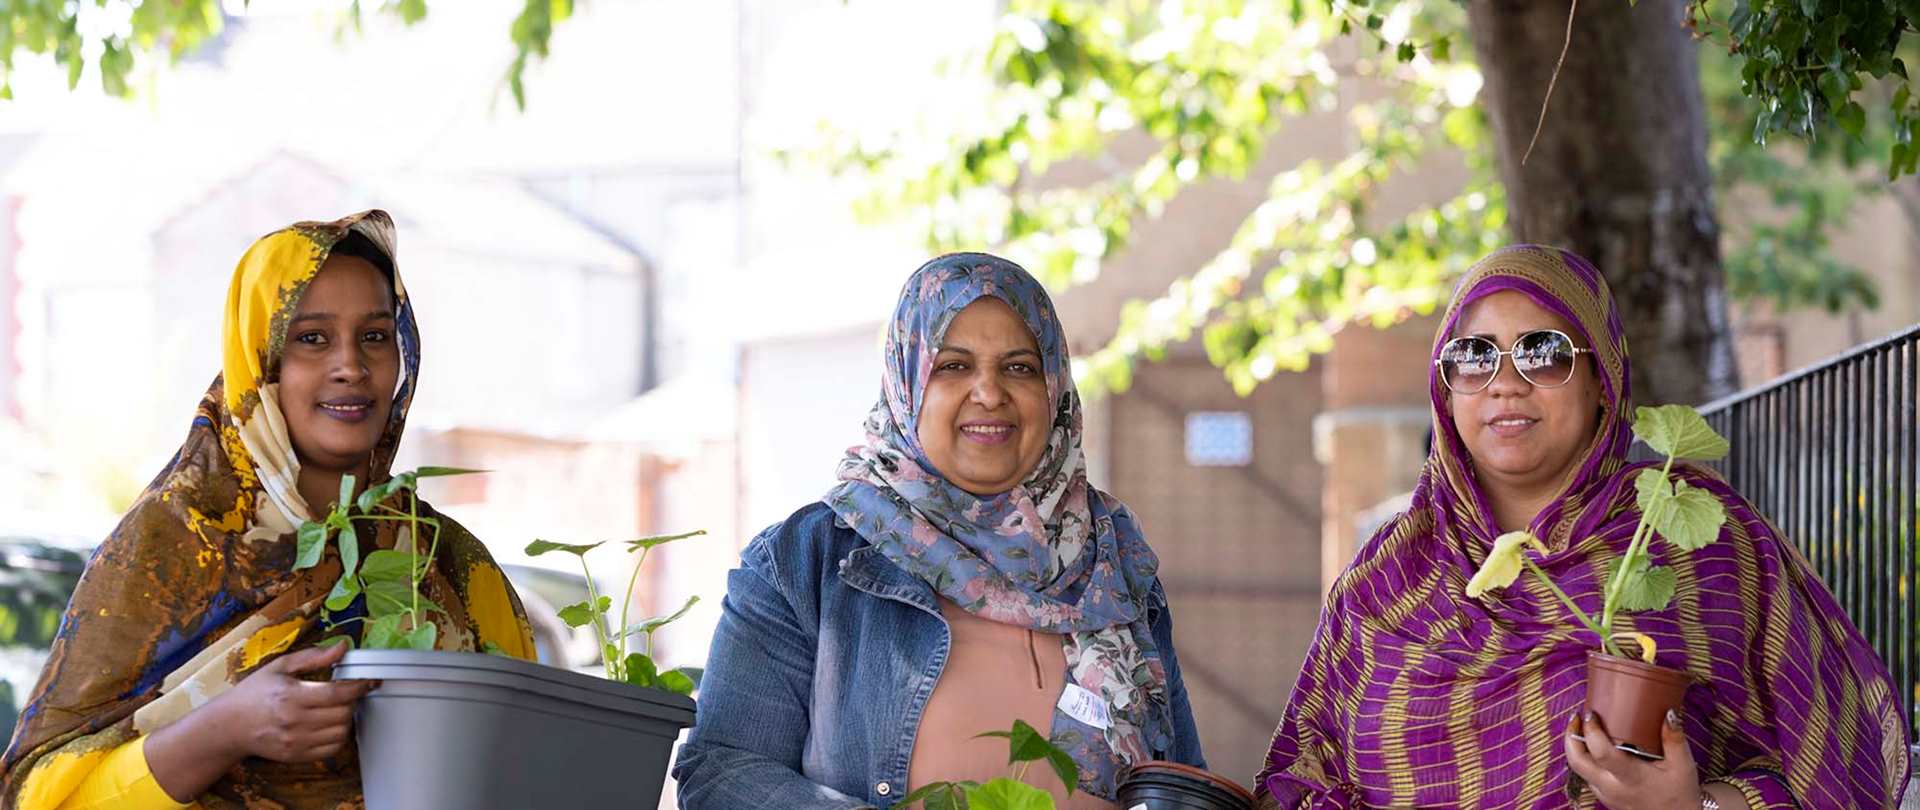 Three women wearing headscarves holding plants in pots and smiling